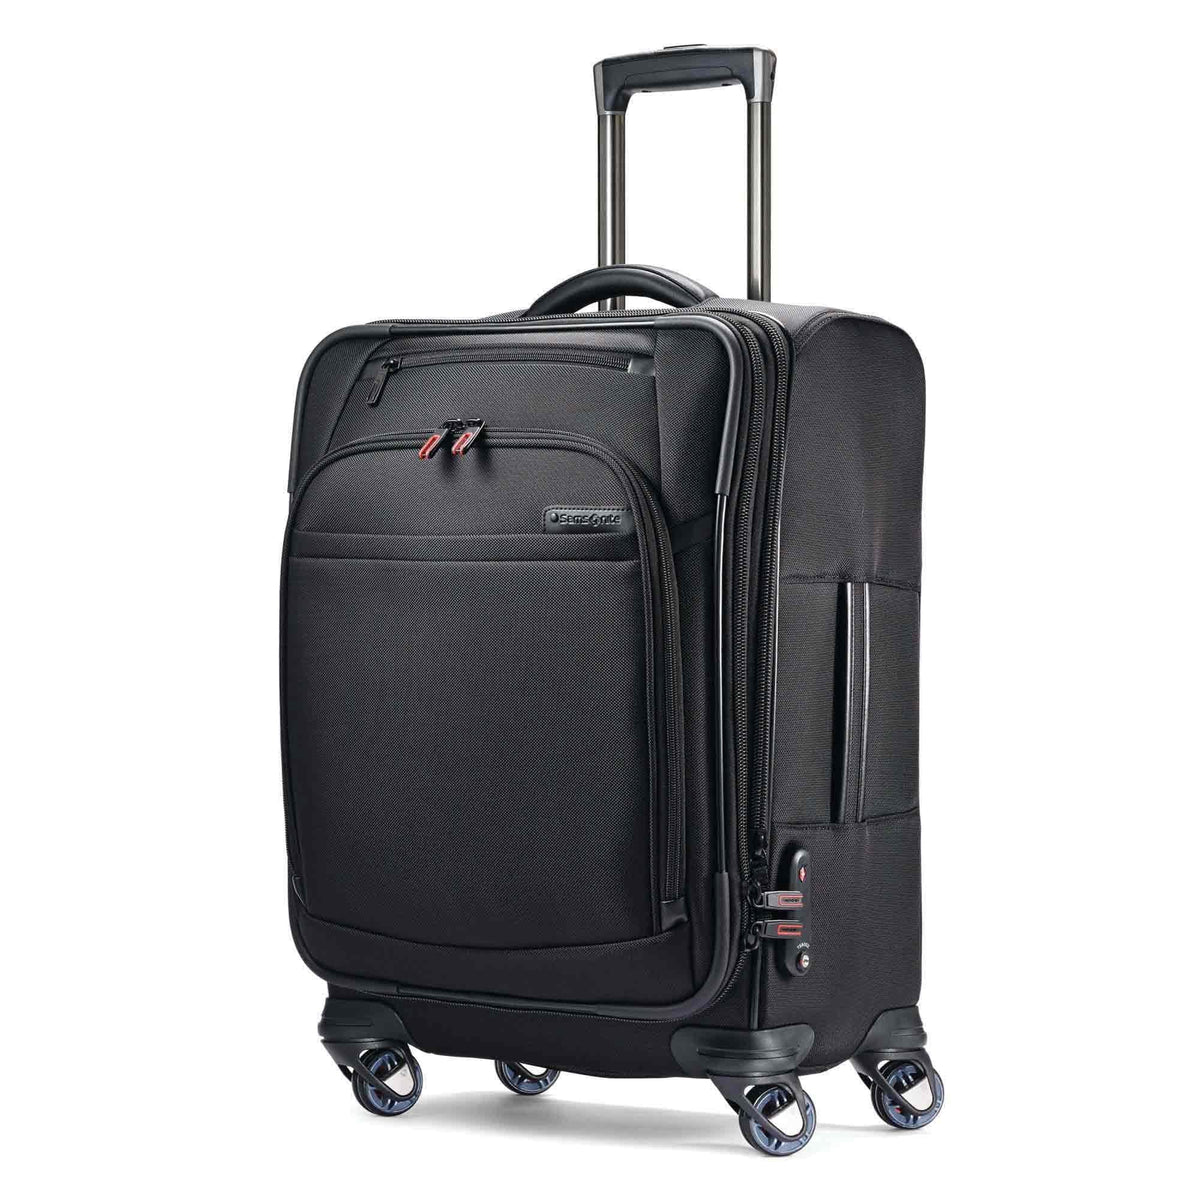 Samsonite Pro 4 DLX Expandable 21" Spinner Carry-on Wheeled Luggage